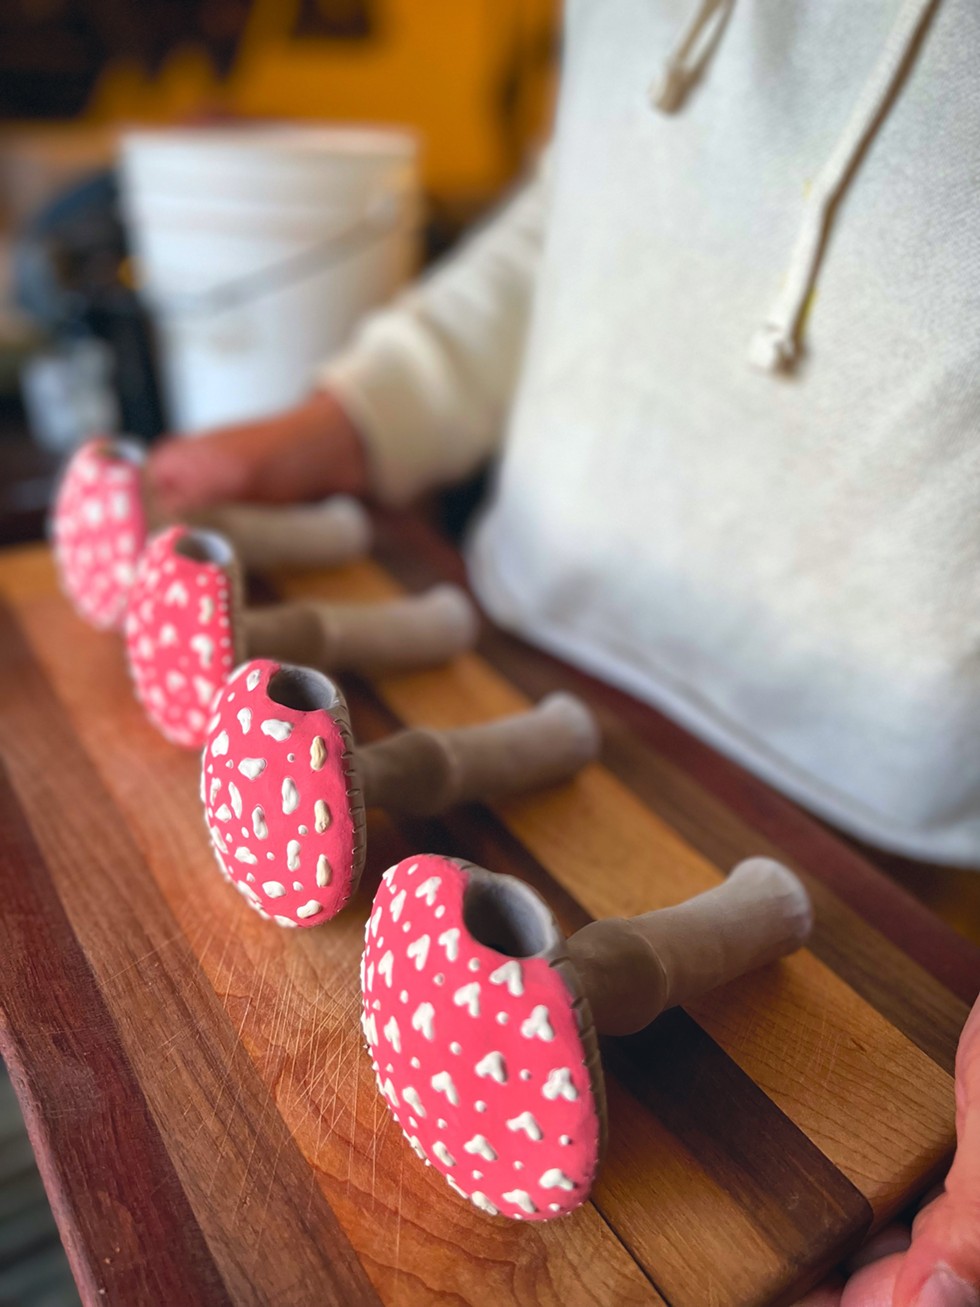 Mushroom pipes are a nod to Be's mycological studies. - PHOTO COURTESY OF CATE BE